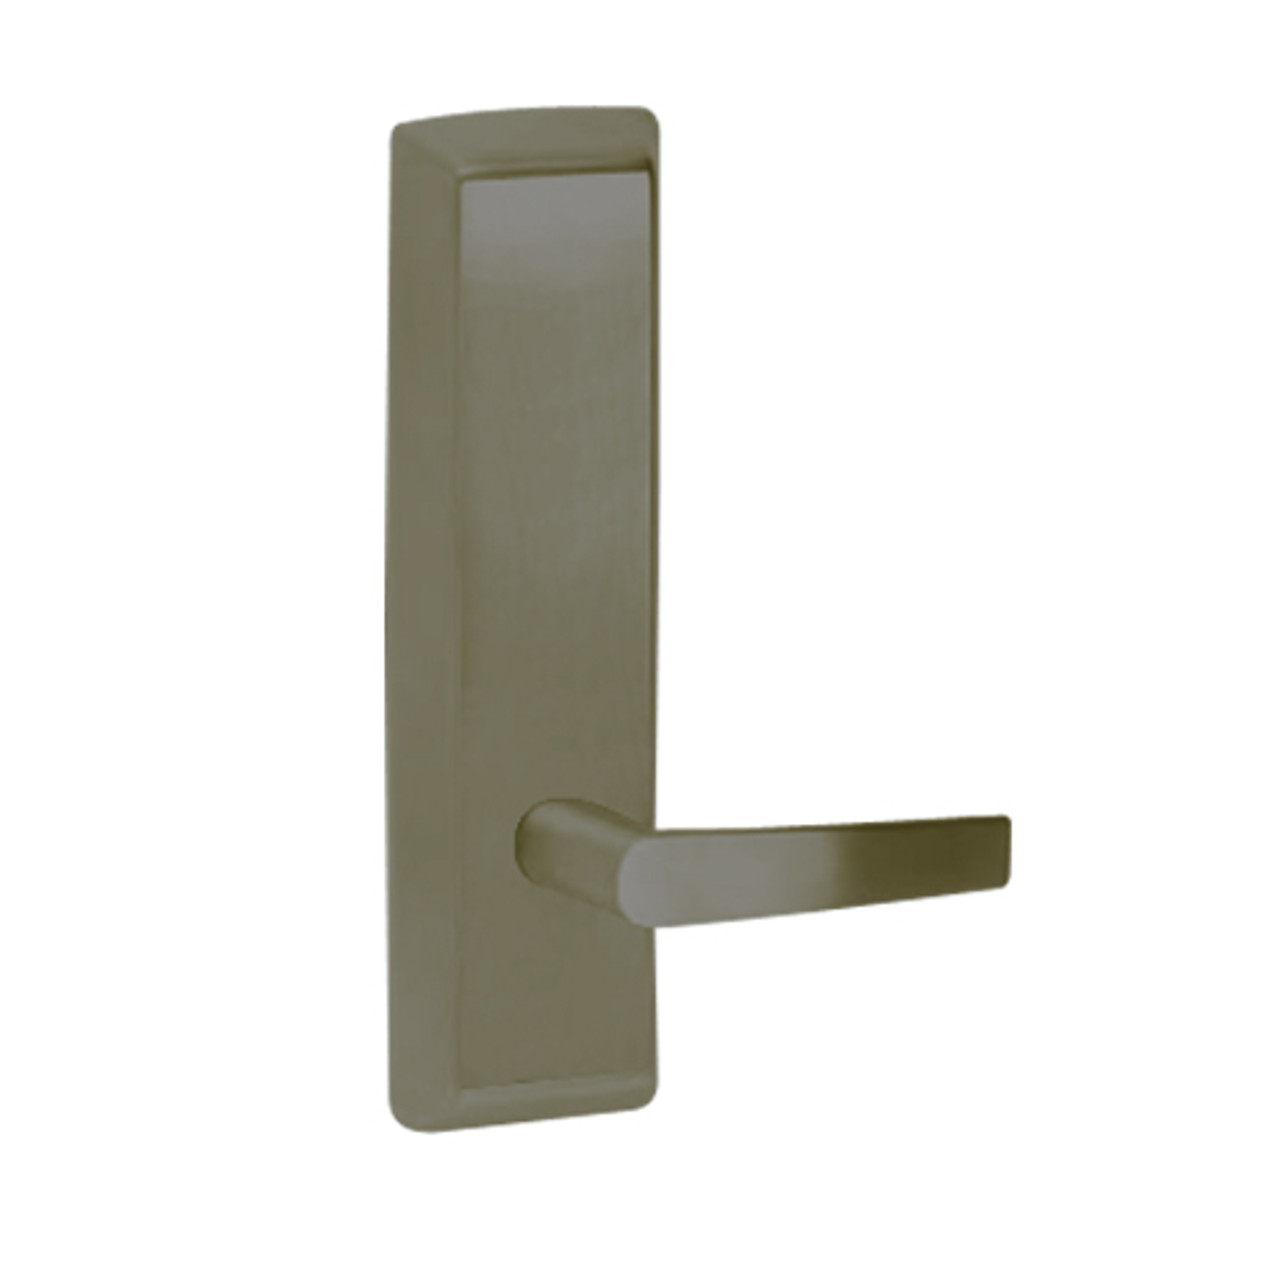 A910-613-LHR Corbin ED5000 Series Exit Device Trim with Passage Armstrong Lever in Oil Rubbed Bronze Finish